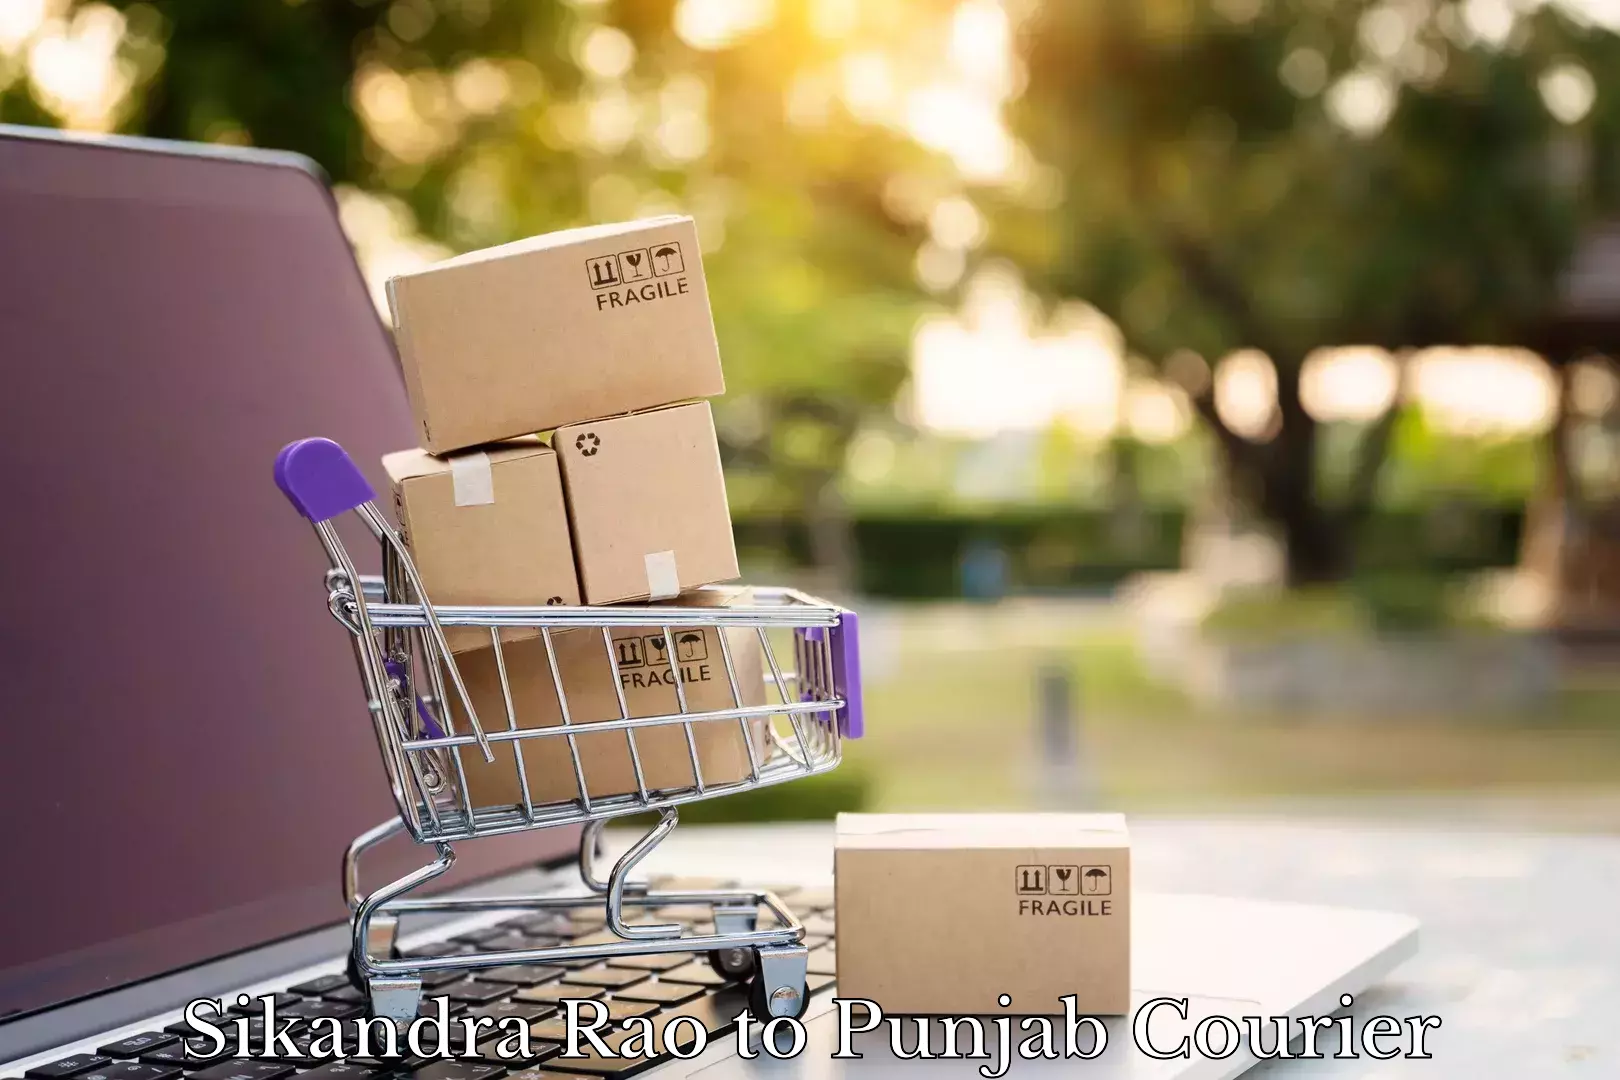 Advanced parcel tracking in Sikandra Rao to Punjab